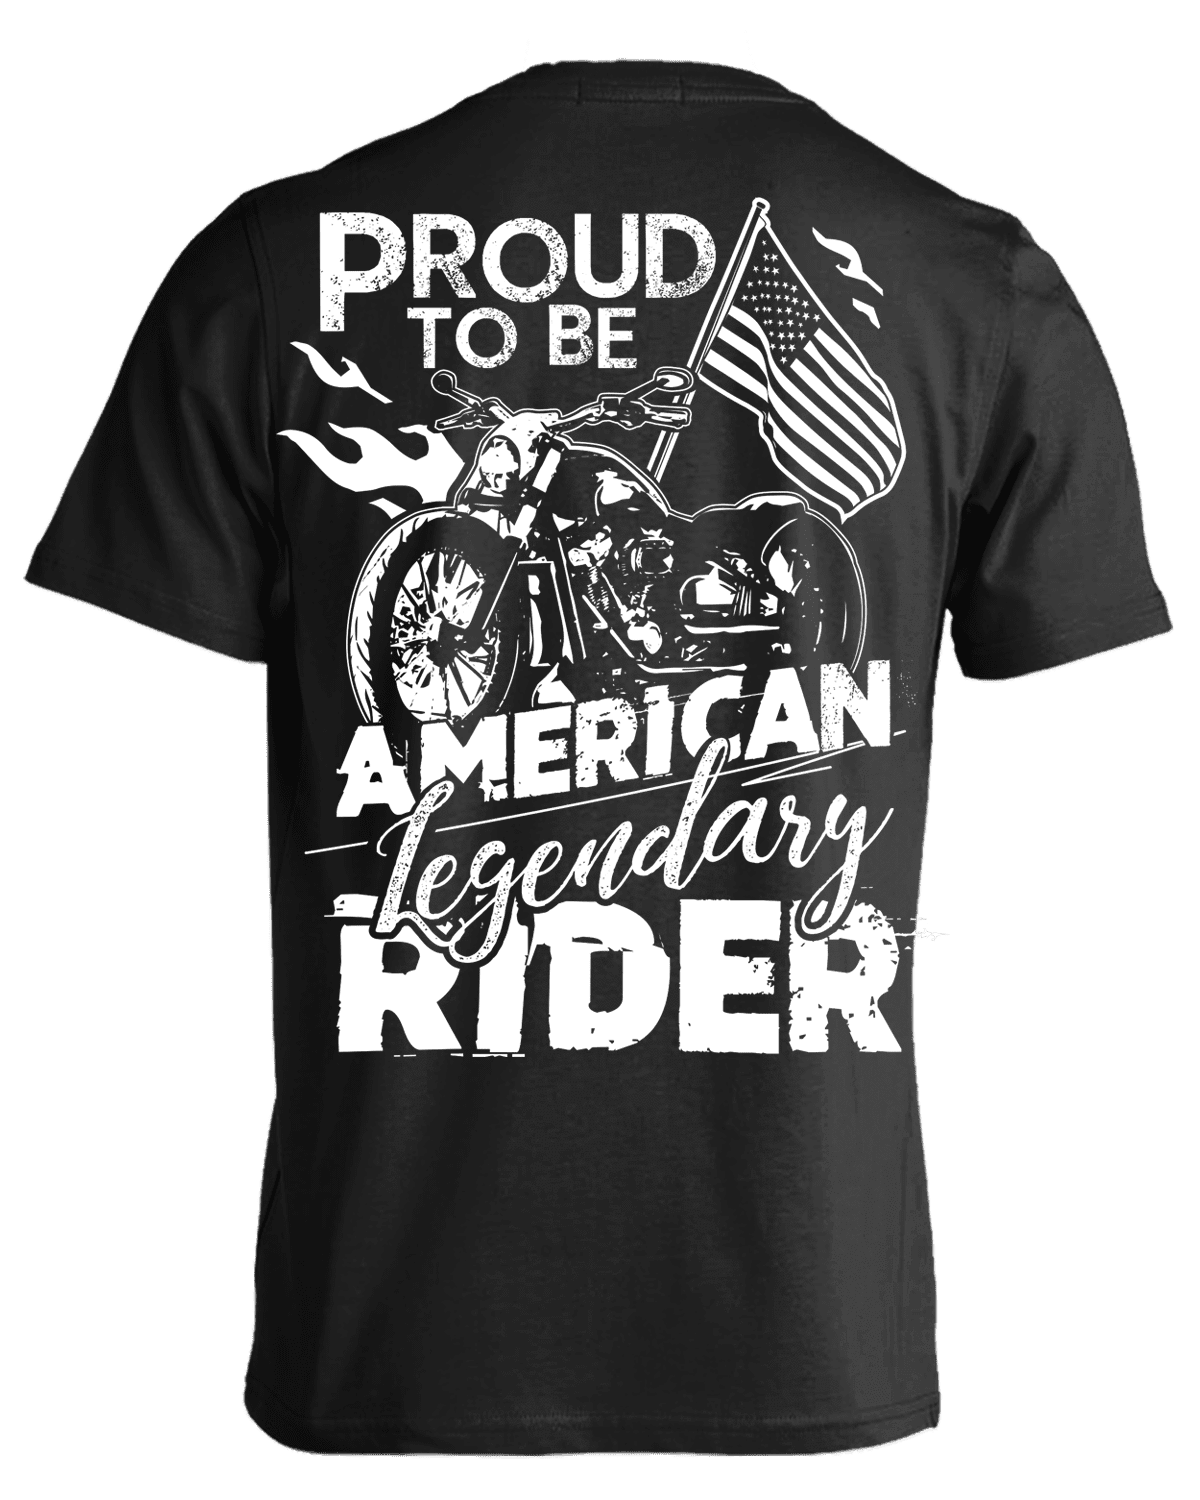 Proud to be American Legendary Rider T-Shirt